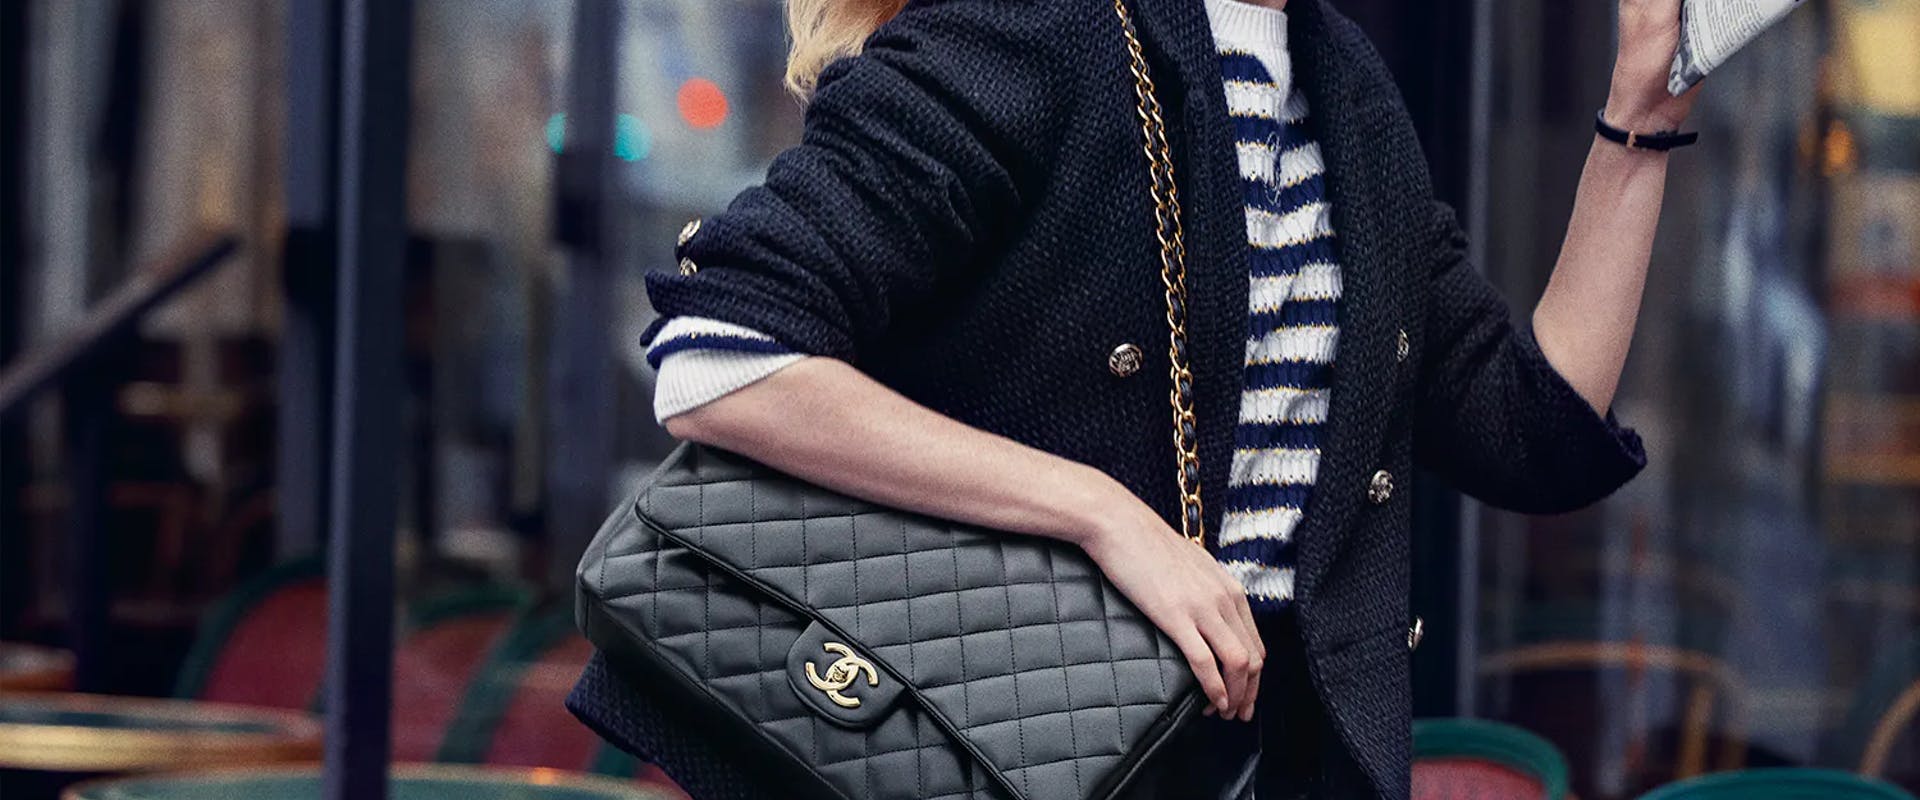 Sofia Coppola Brings an Icon to the Streets in Chanel's Latest Bag Campaign